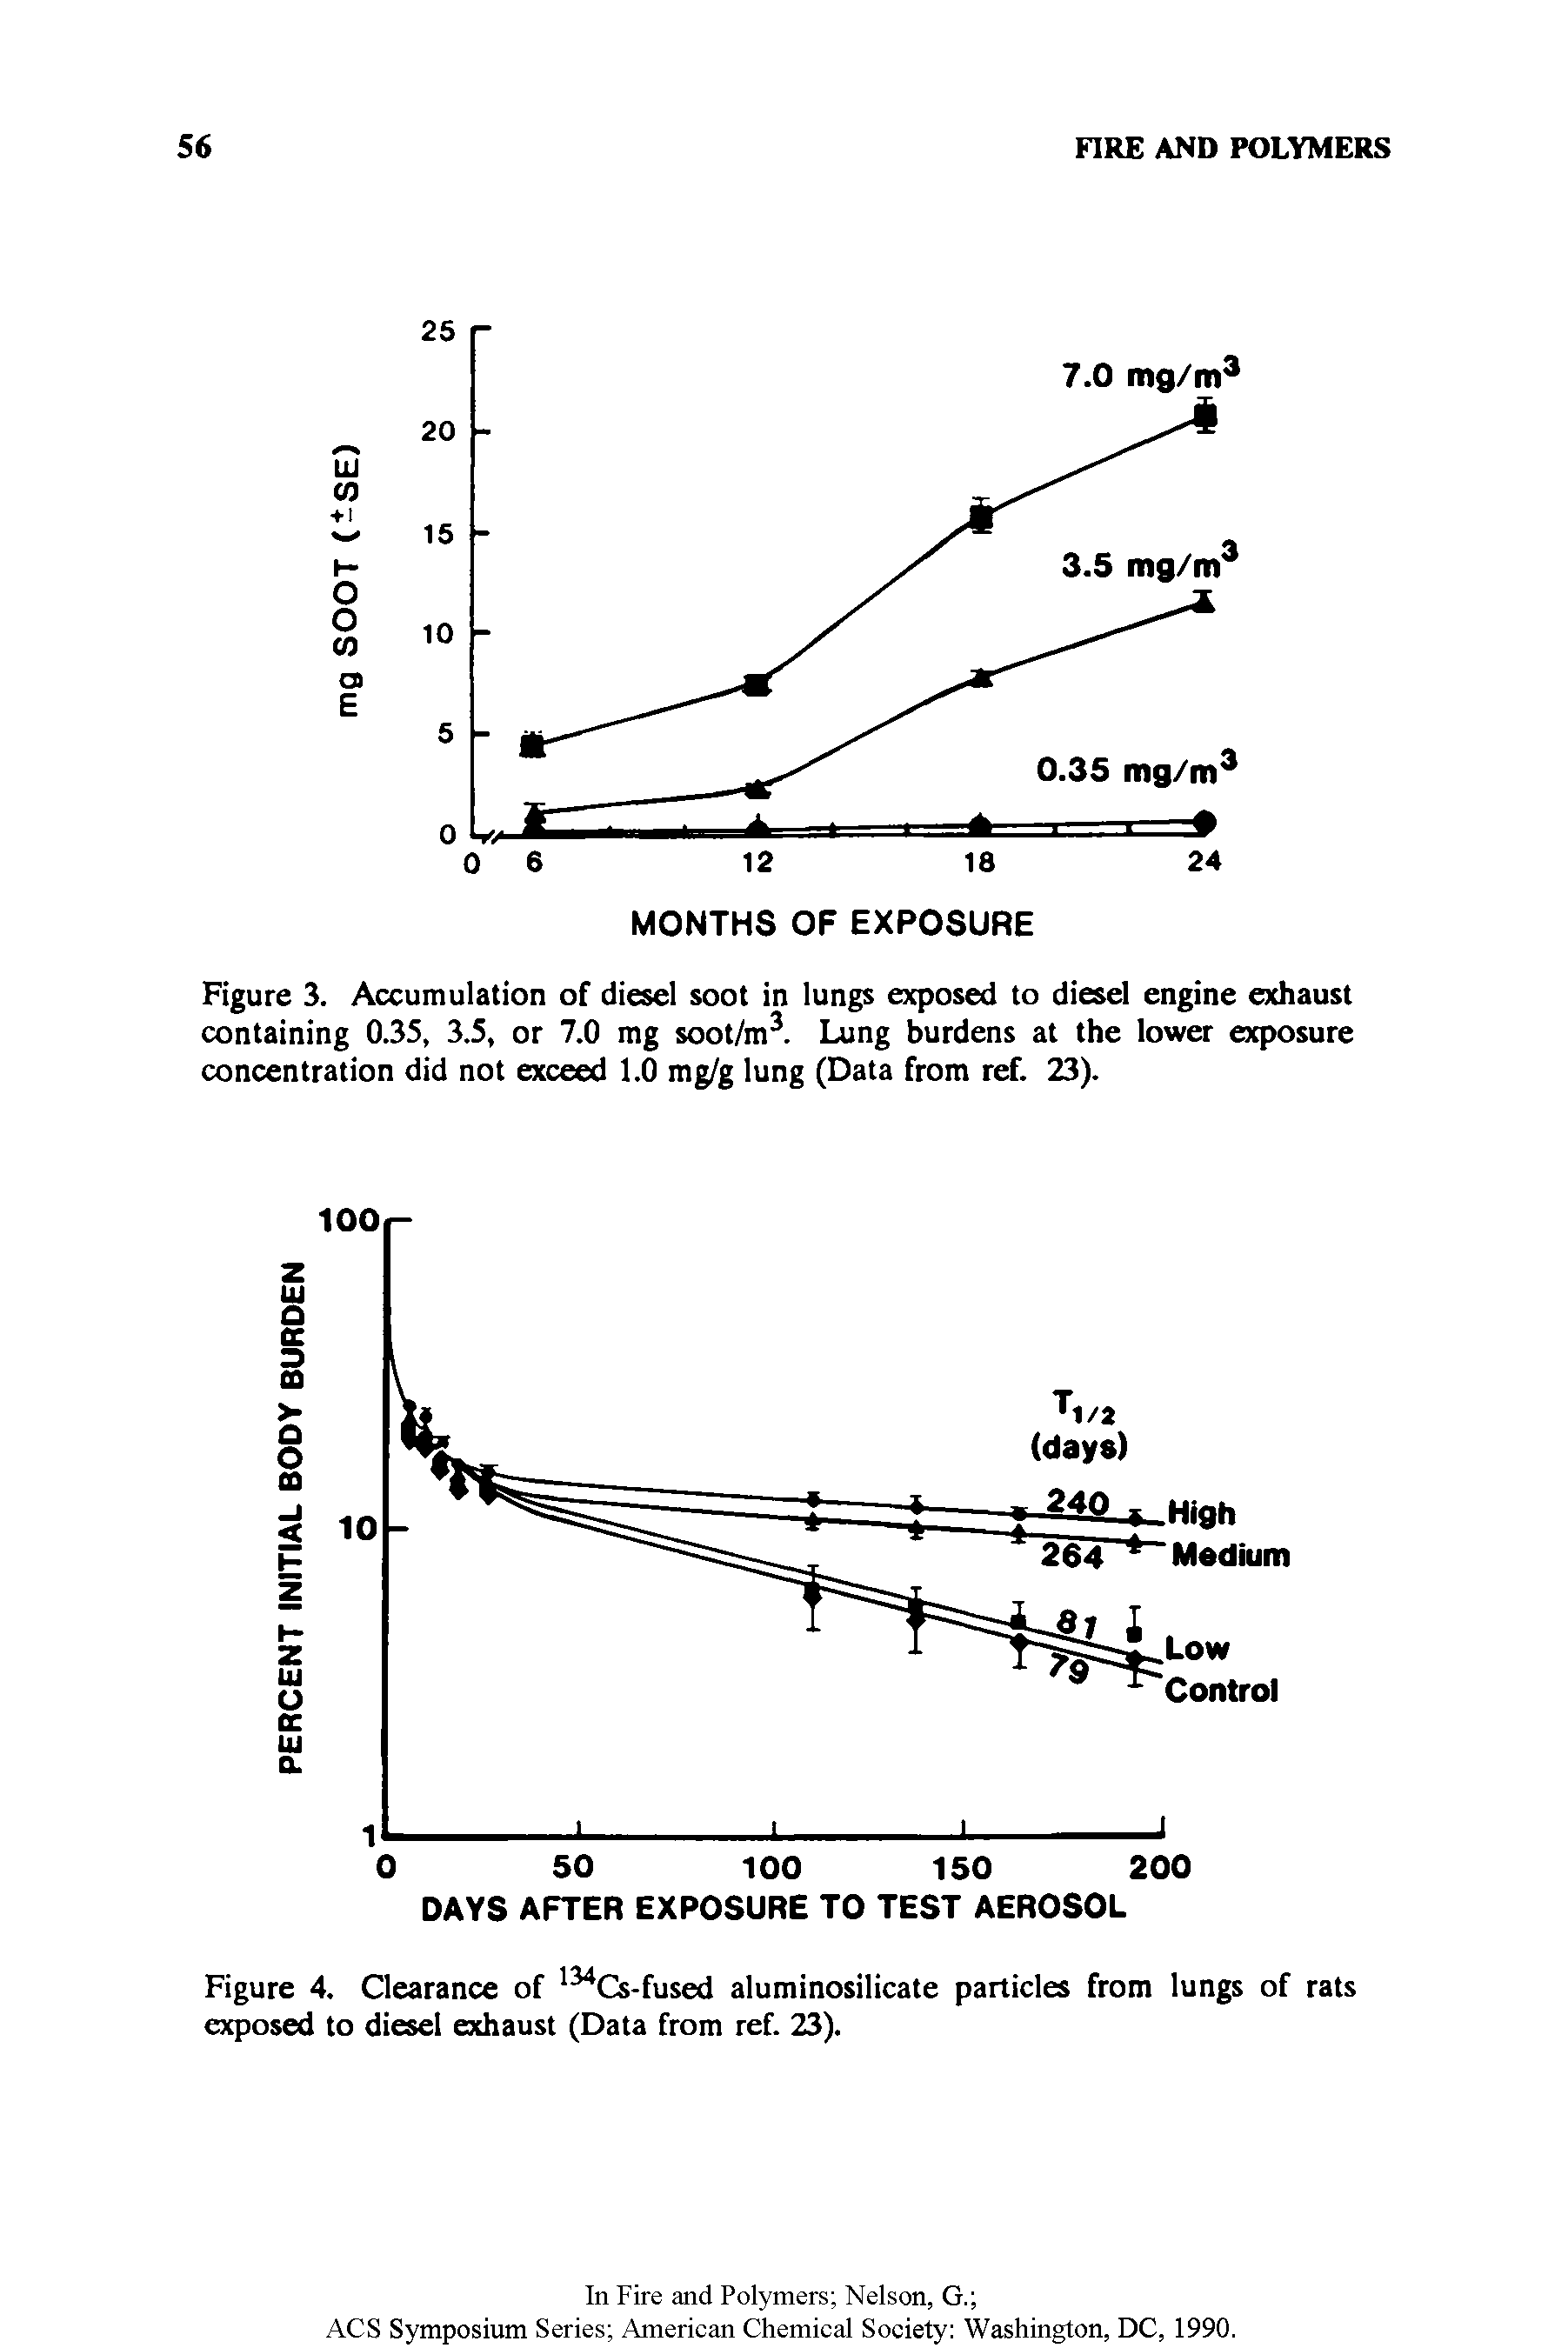 Figure 4. Clearance of 134Cs-fused aluminosilicate particles from lungs of rats exposed to diesel exhaust (Data from ref. 23).